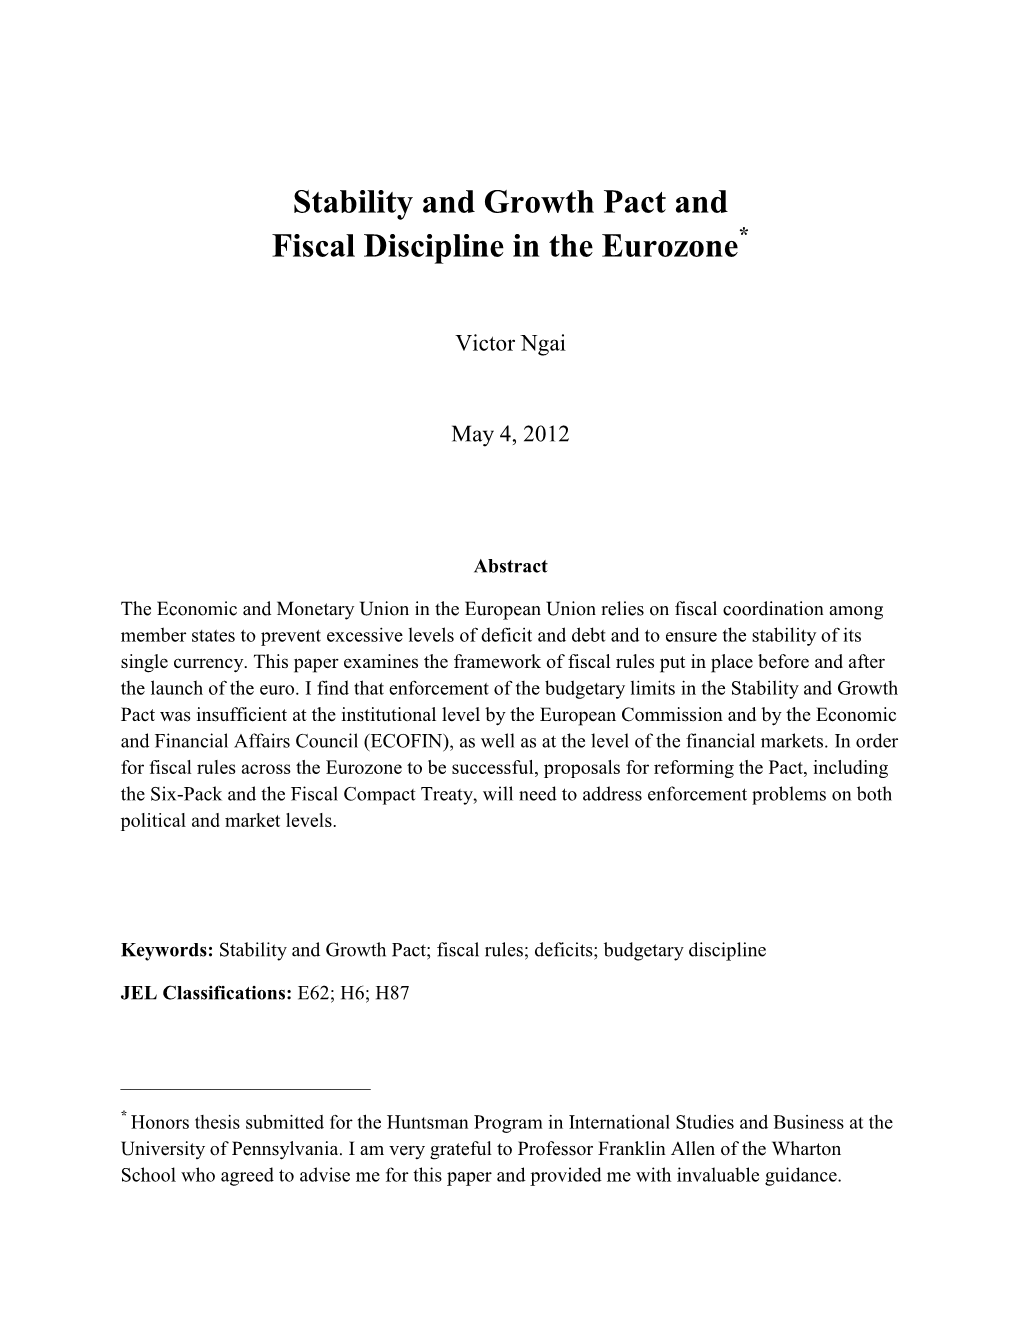 Stability and Growth Pact and Fiscal Discipline in the Eurozone*